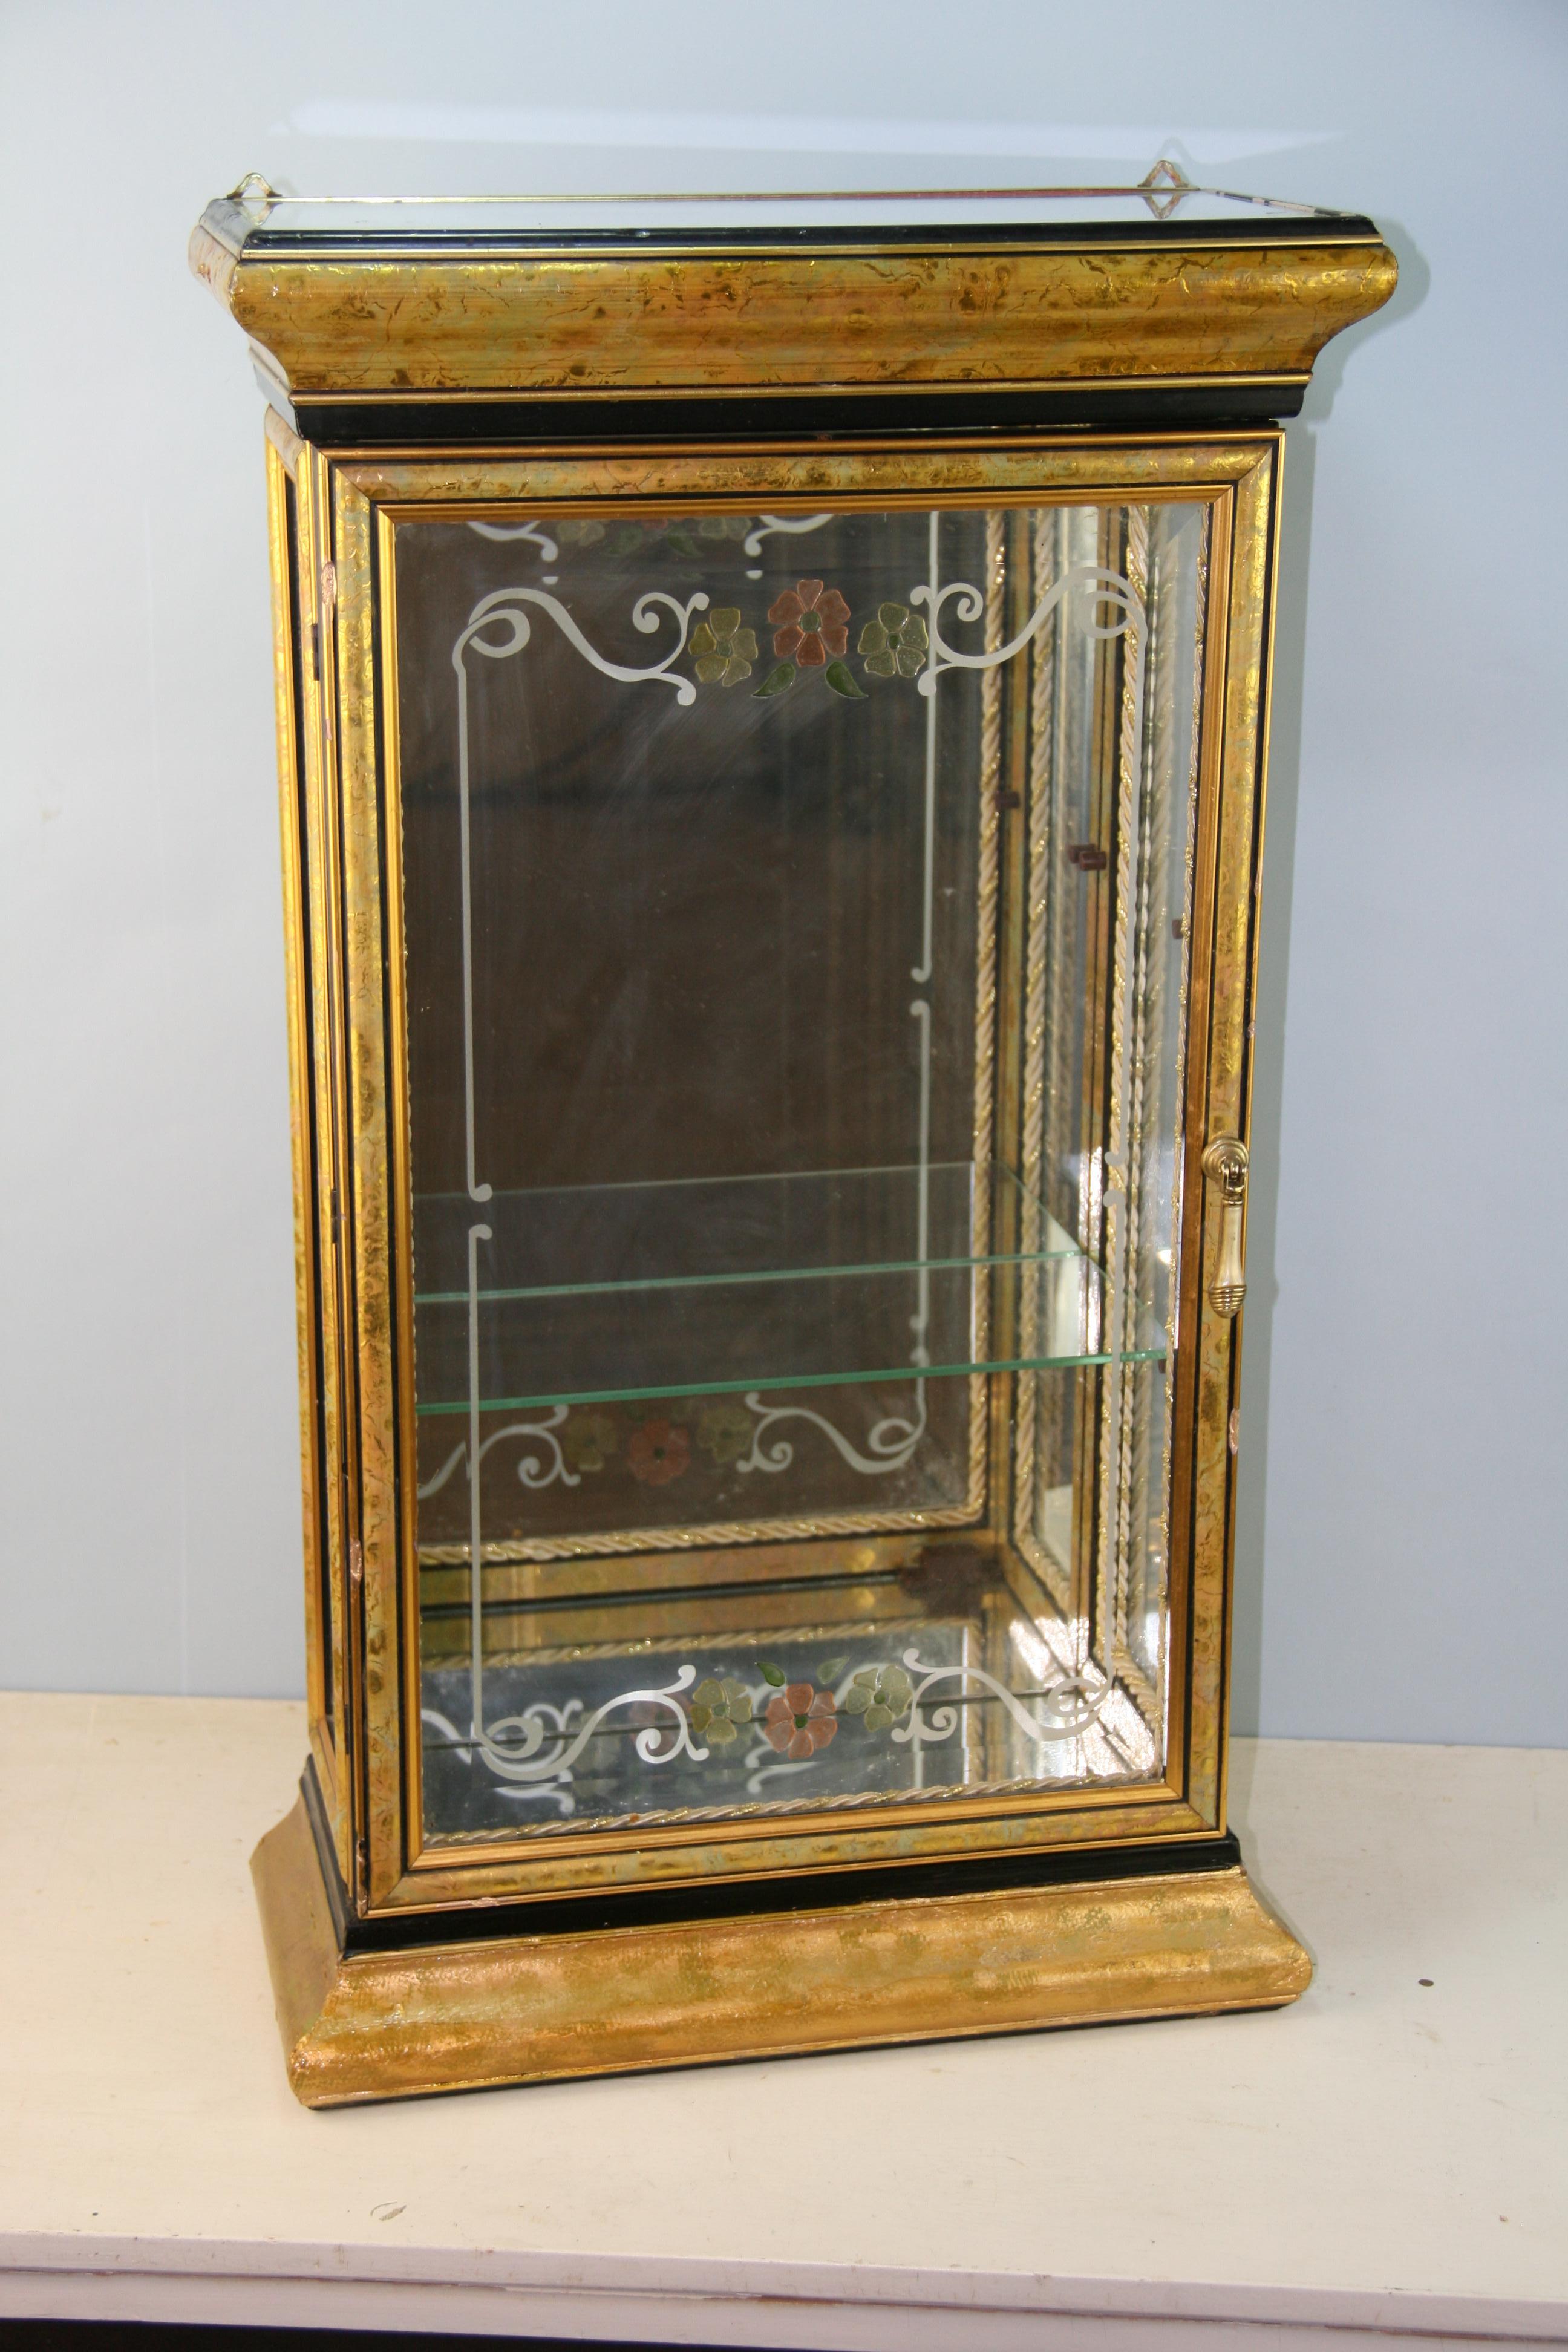 Hand crafted vitrine/curiosity cabinet with 2 glass shelves
Can stand on counter or hang on wall.